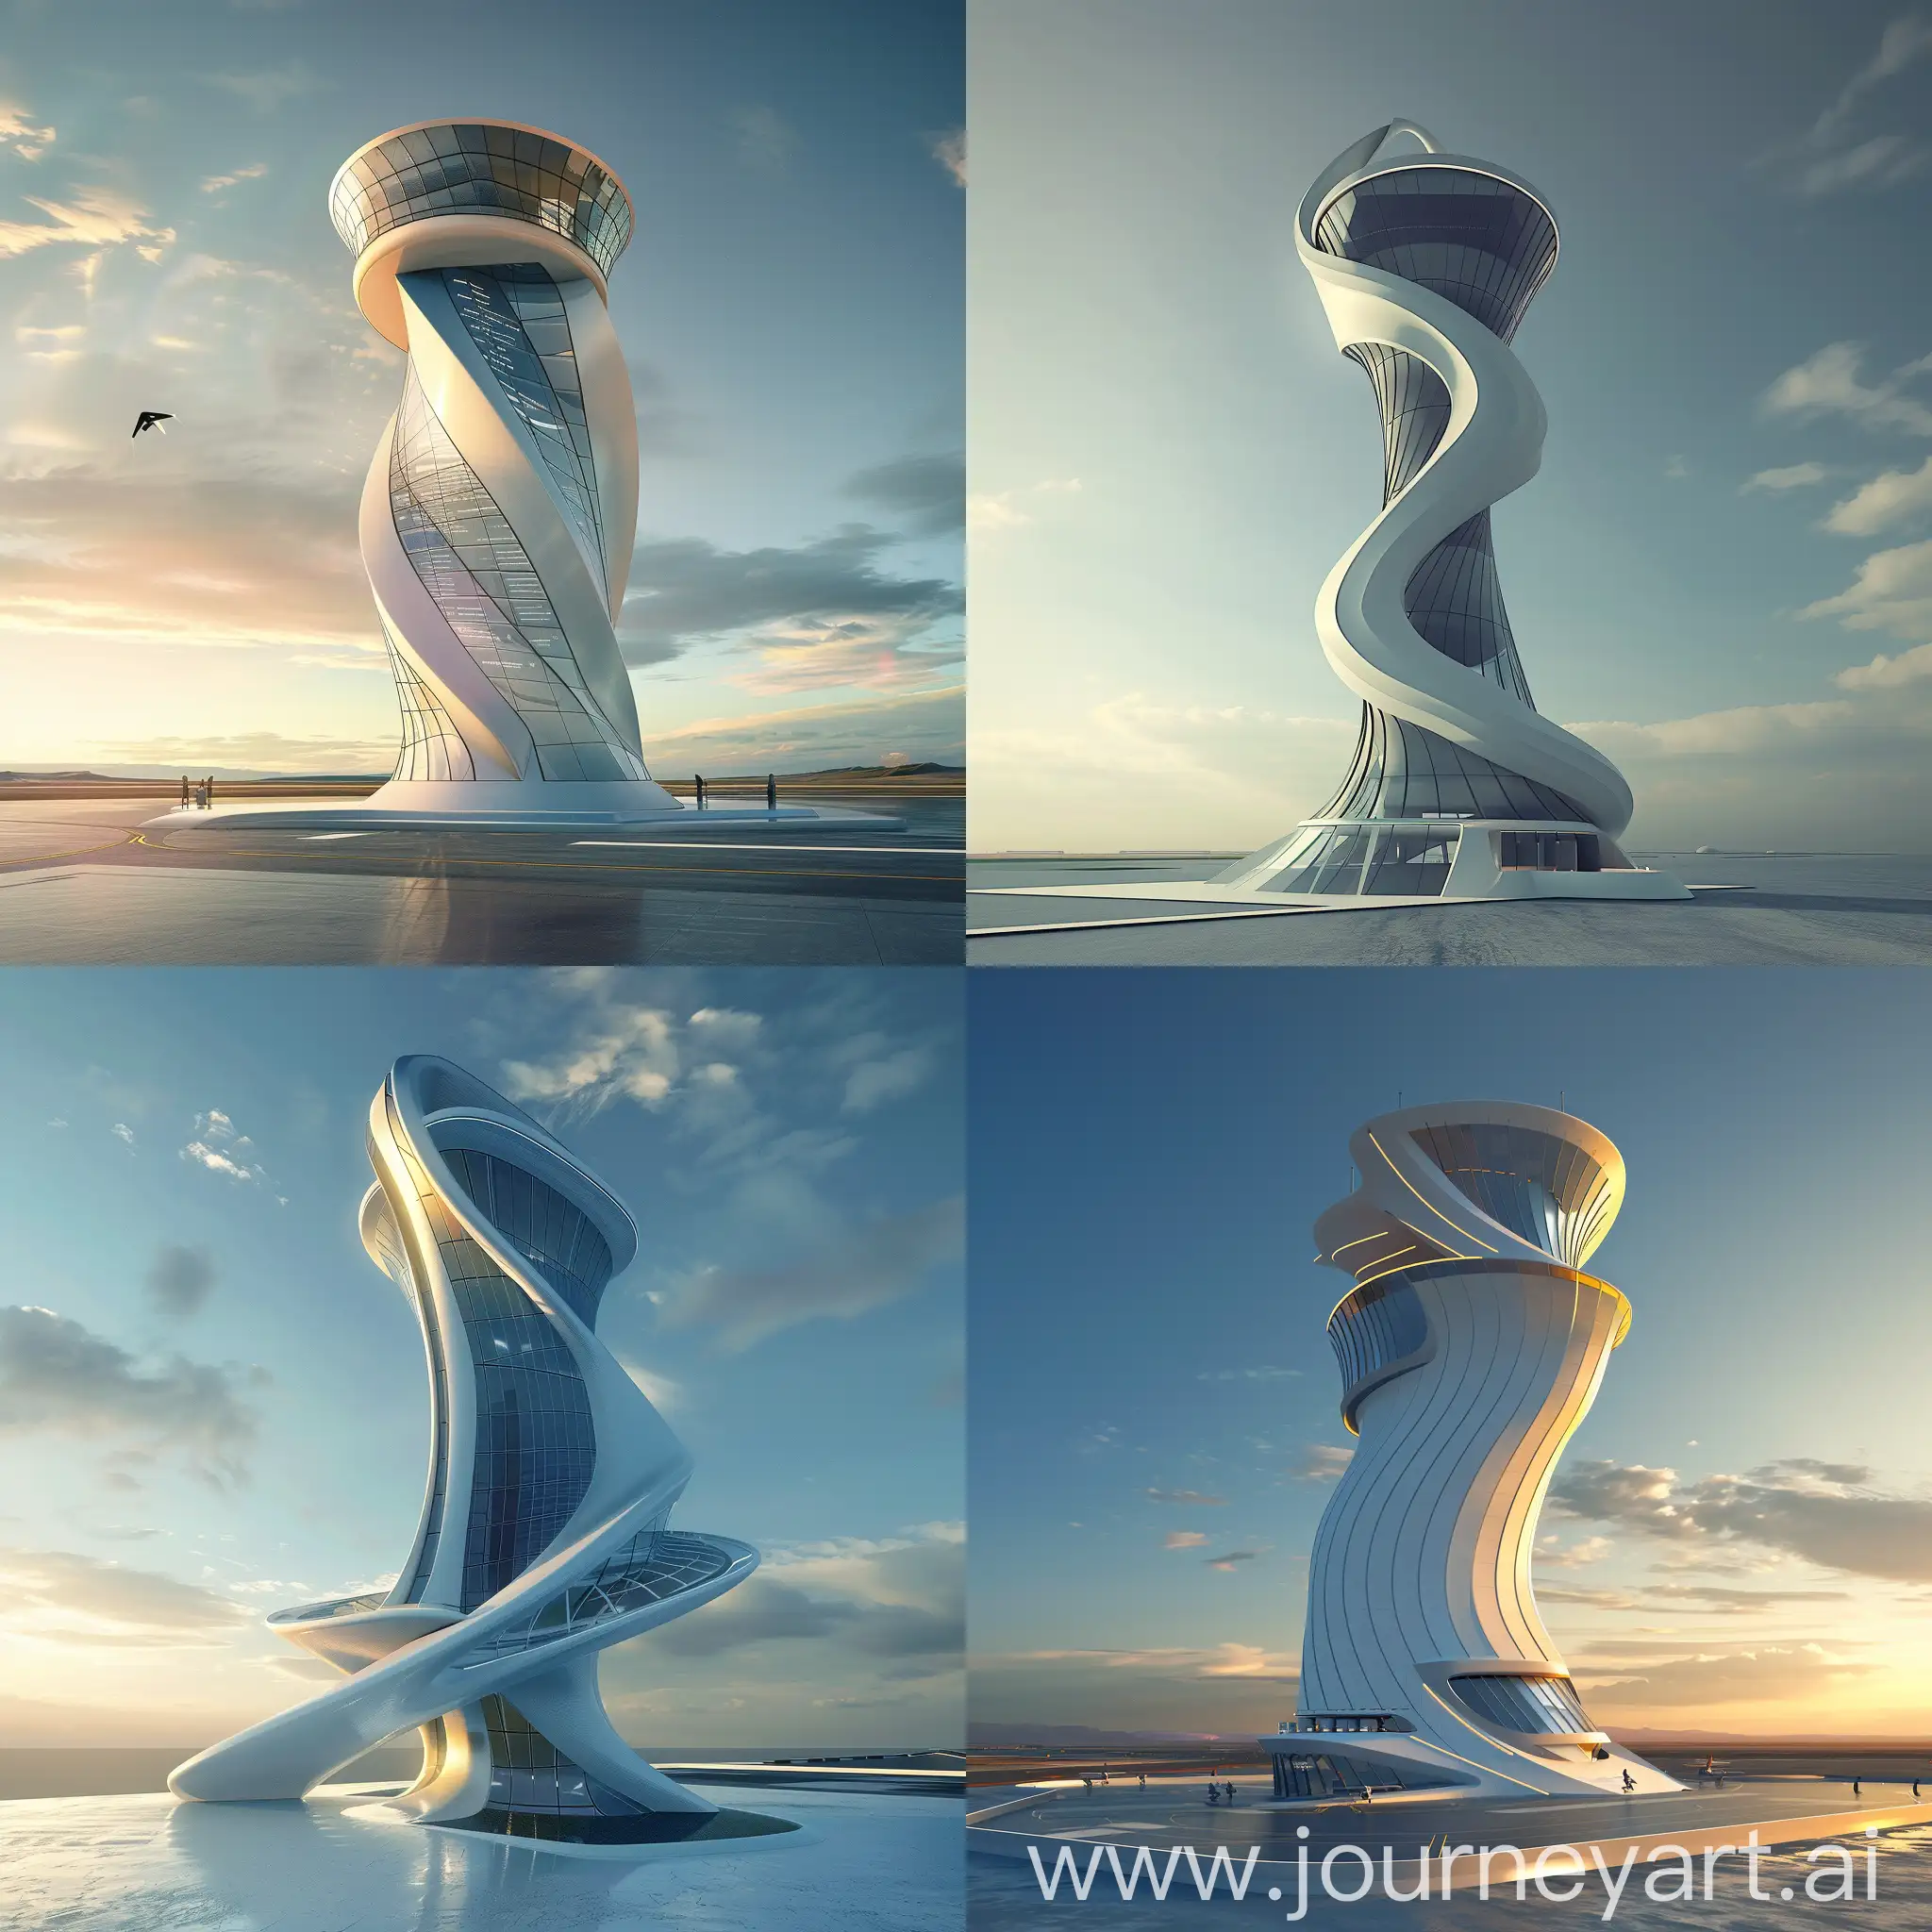 Imagine a futuristic air traffic control tower rising its curves and angles inspired by sea waves